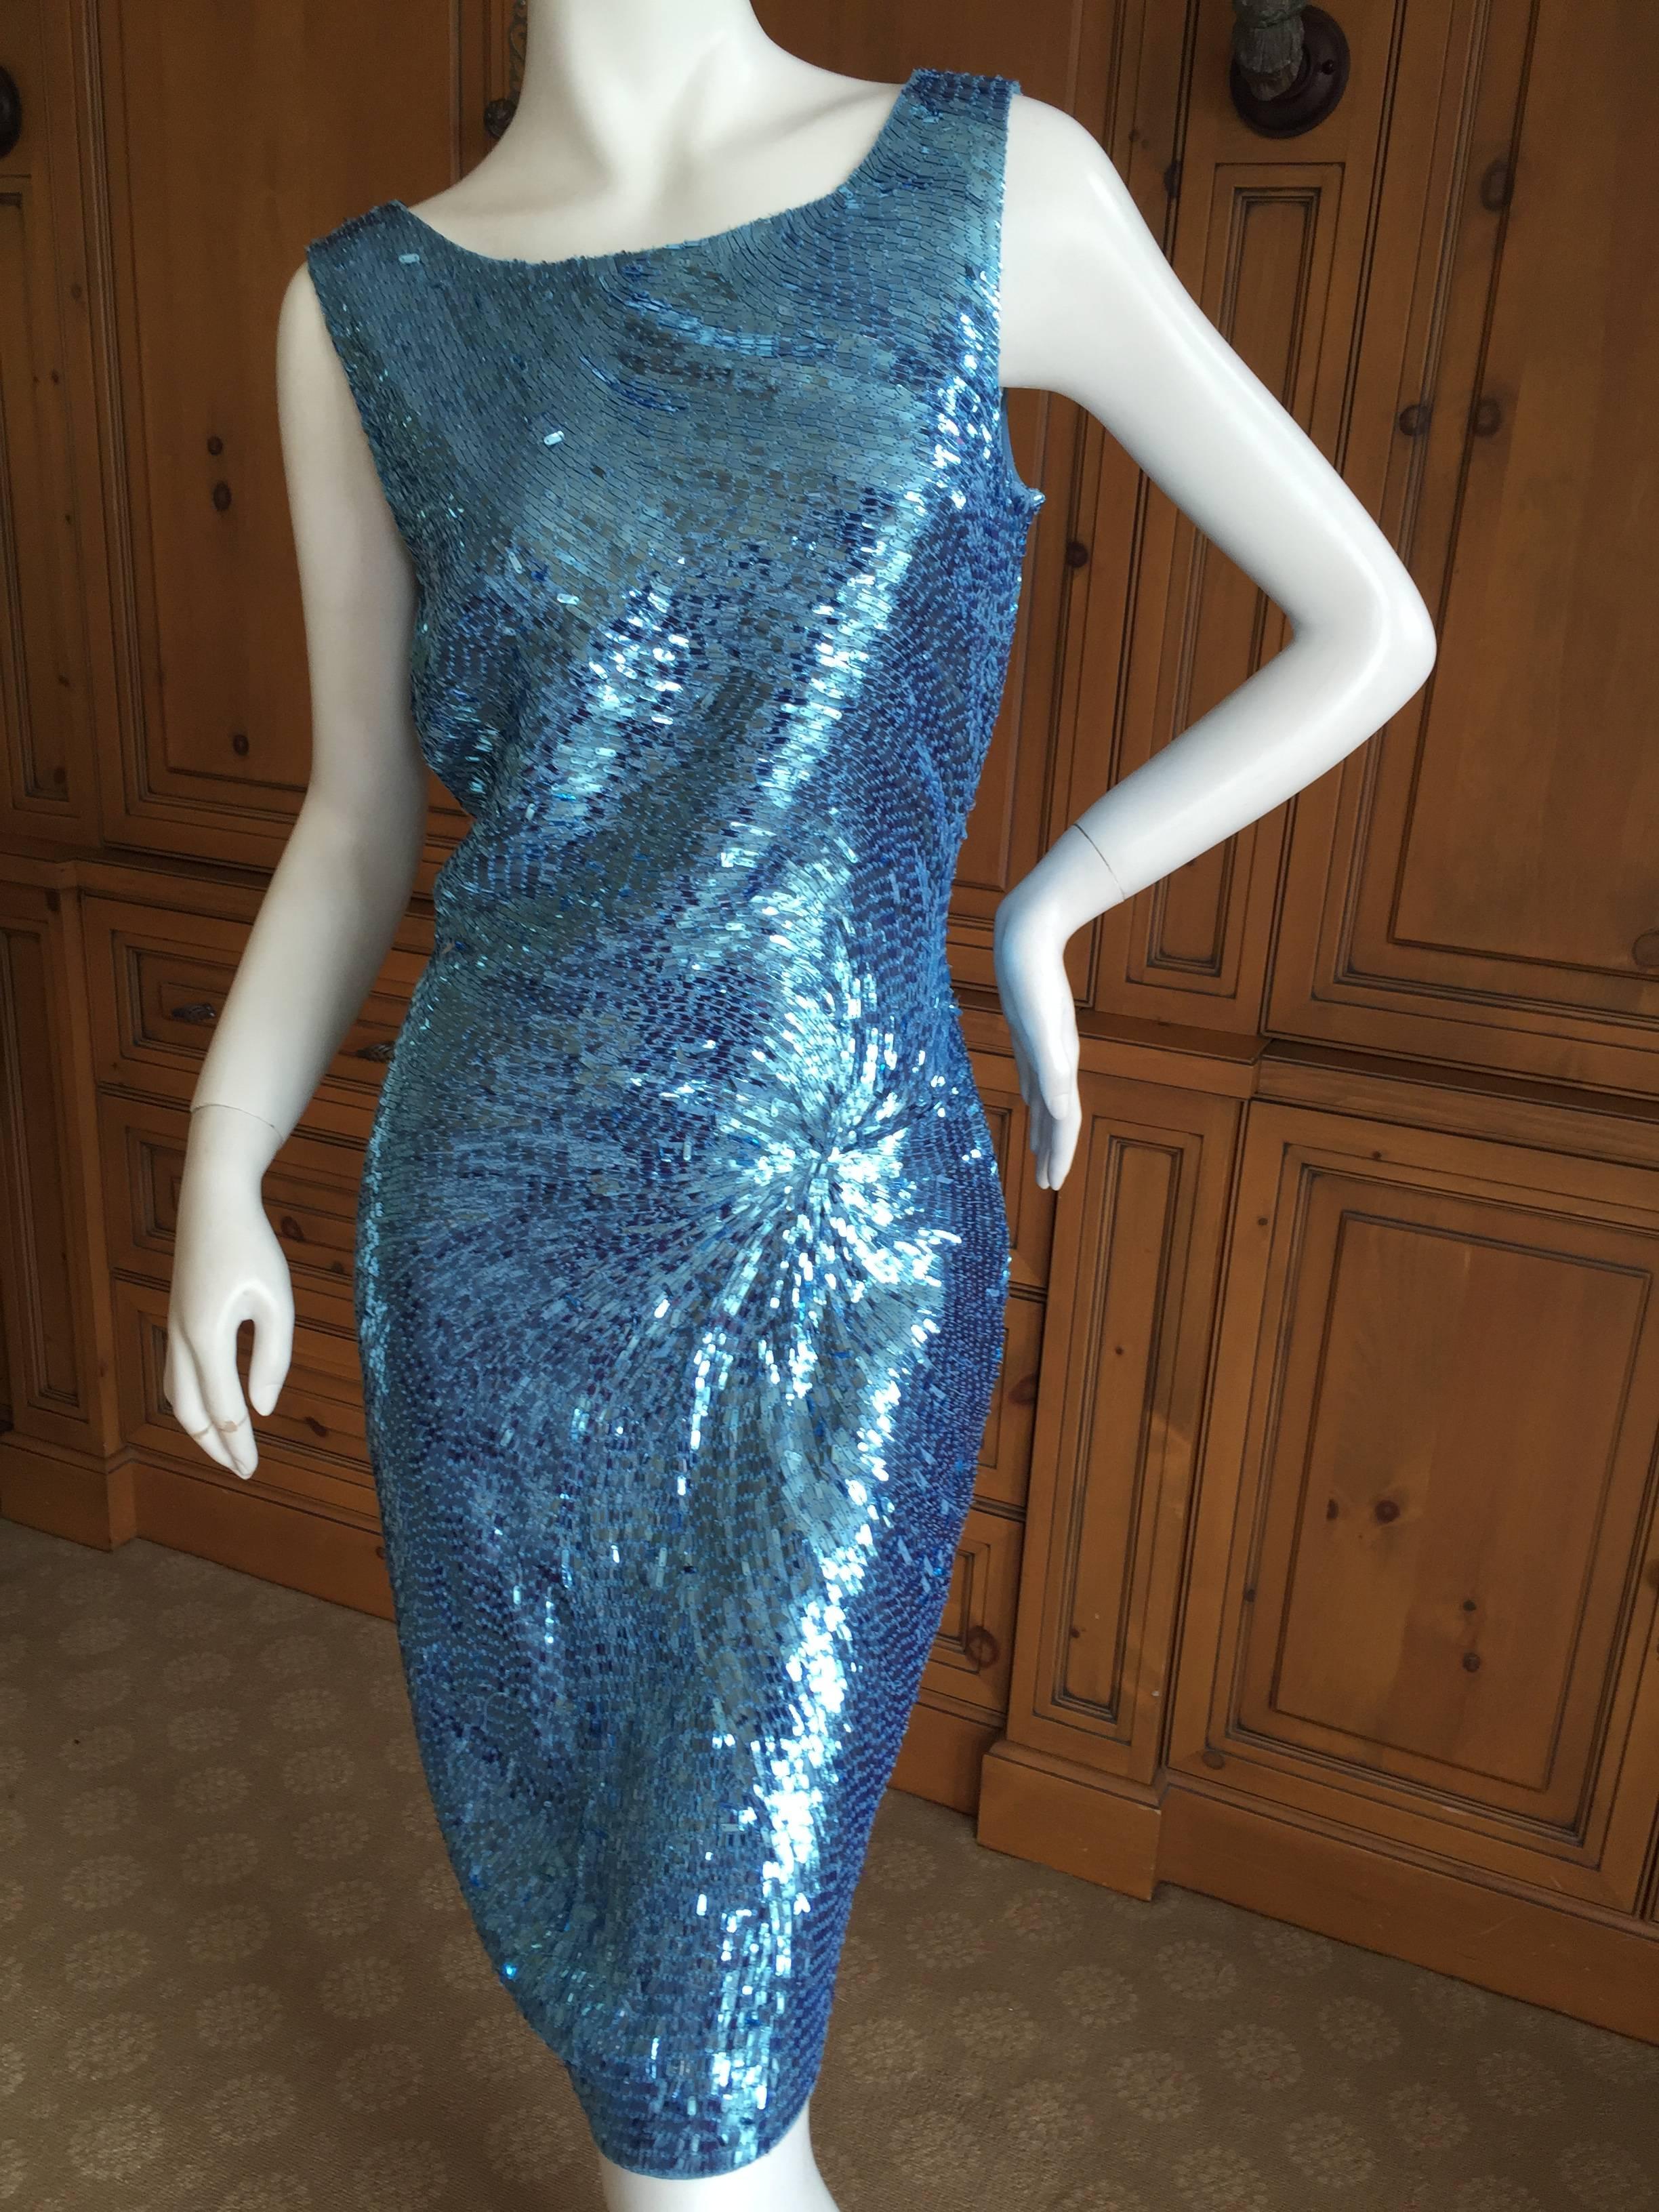 Dreamy Versace Sequin sheath dress.
The sequins swirl in a beautiful pattern, please use the zoom feature to see he details.
Size 42
There is a lot of stretch in the fabric.
Bust 38